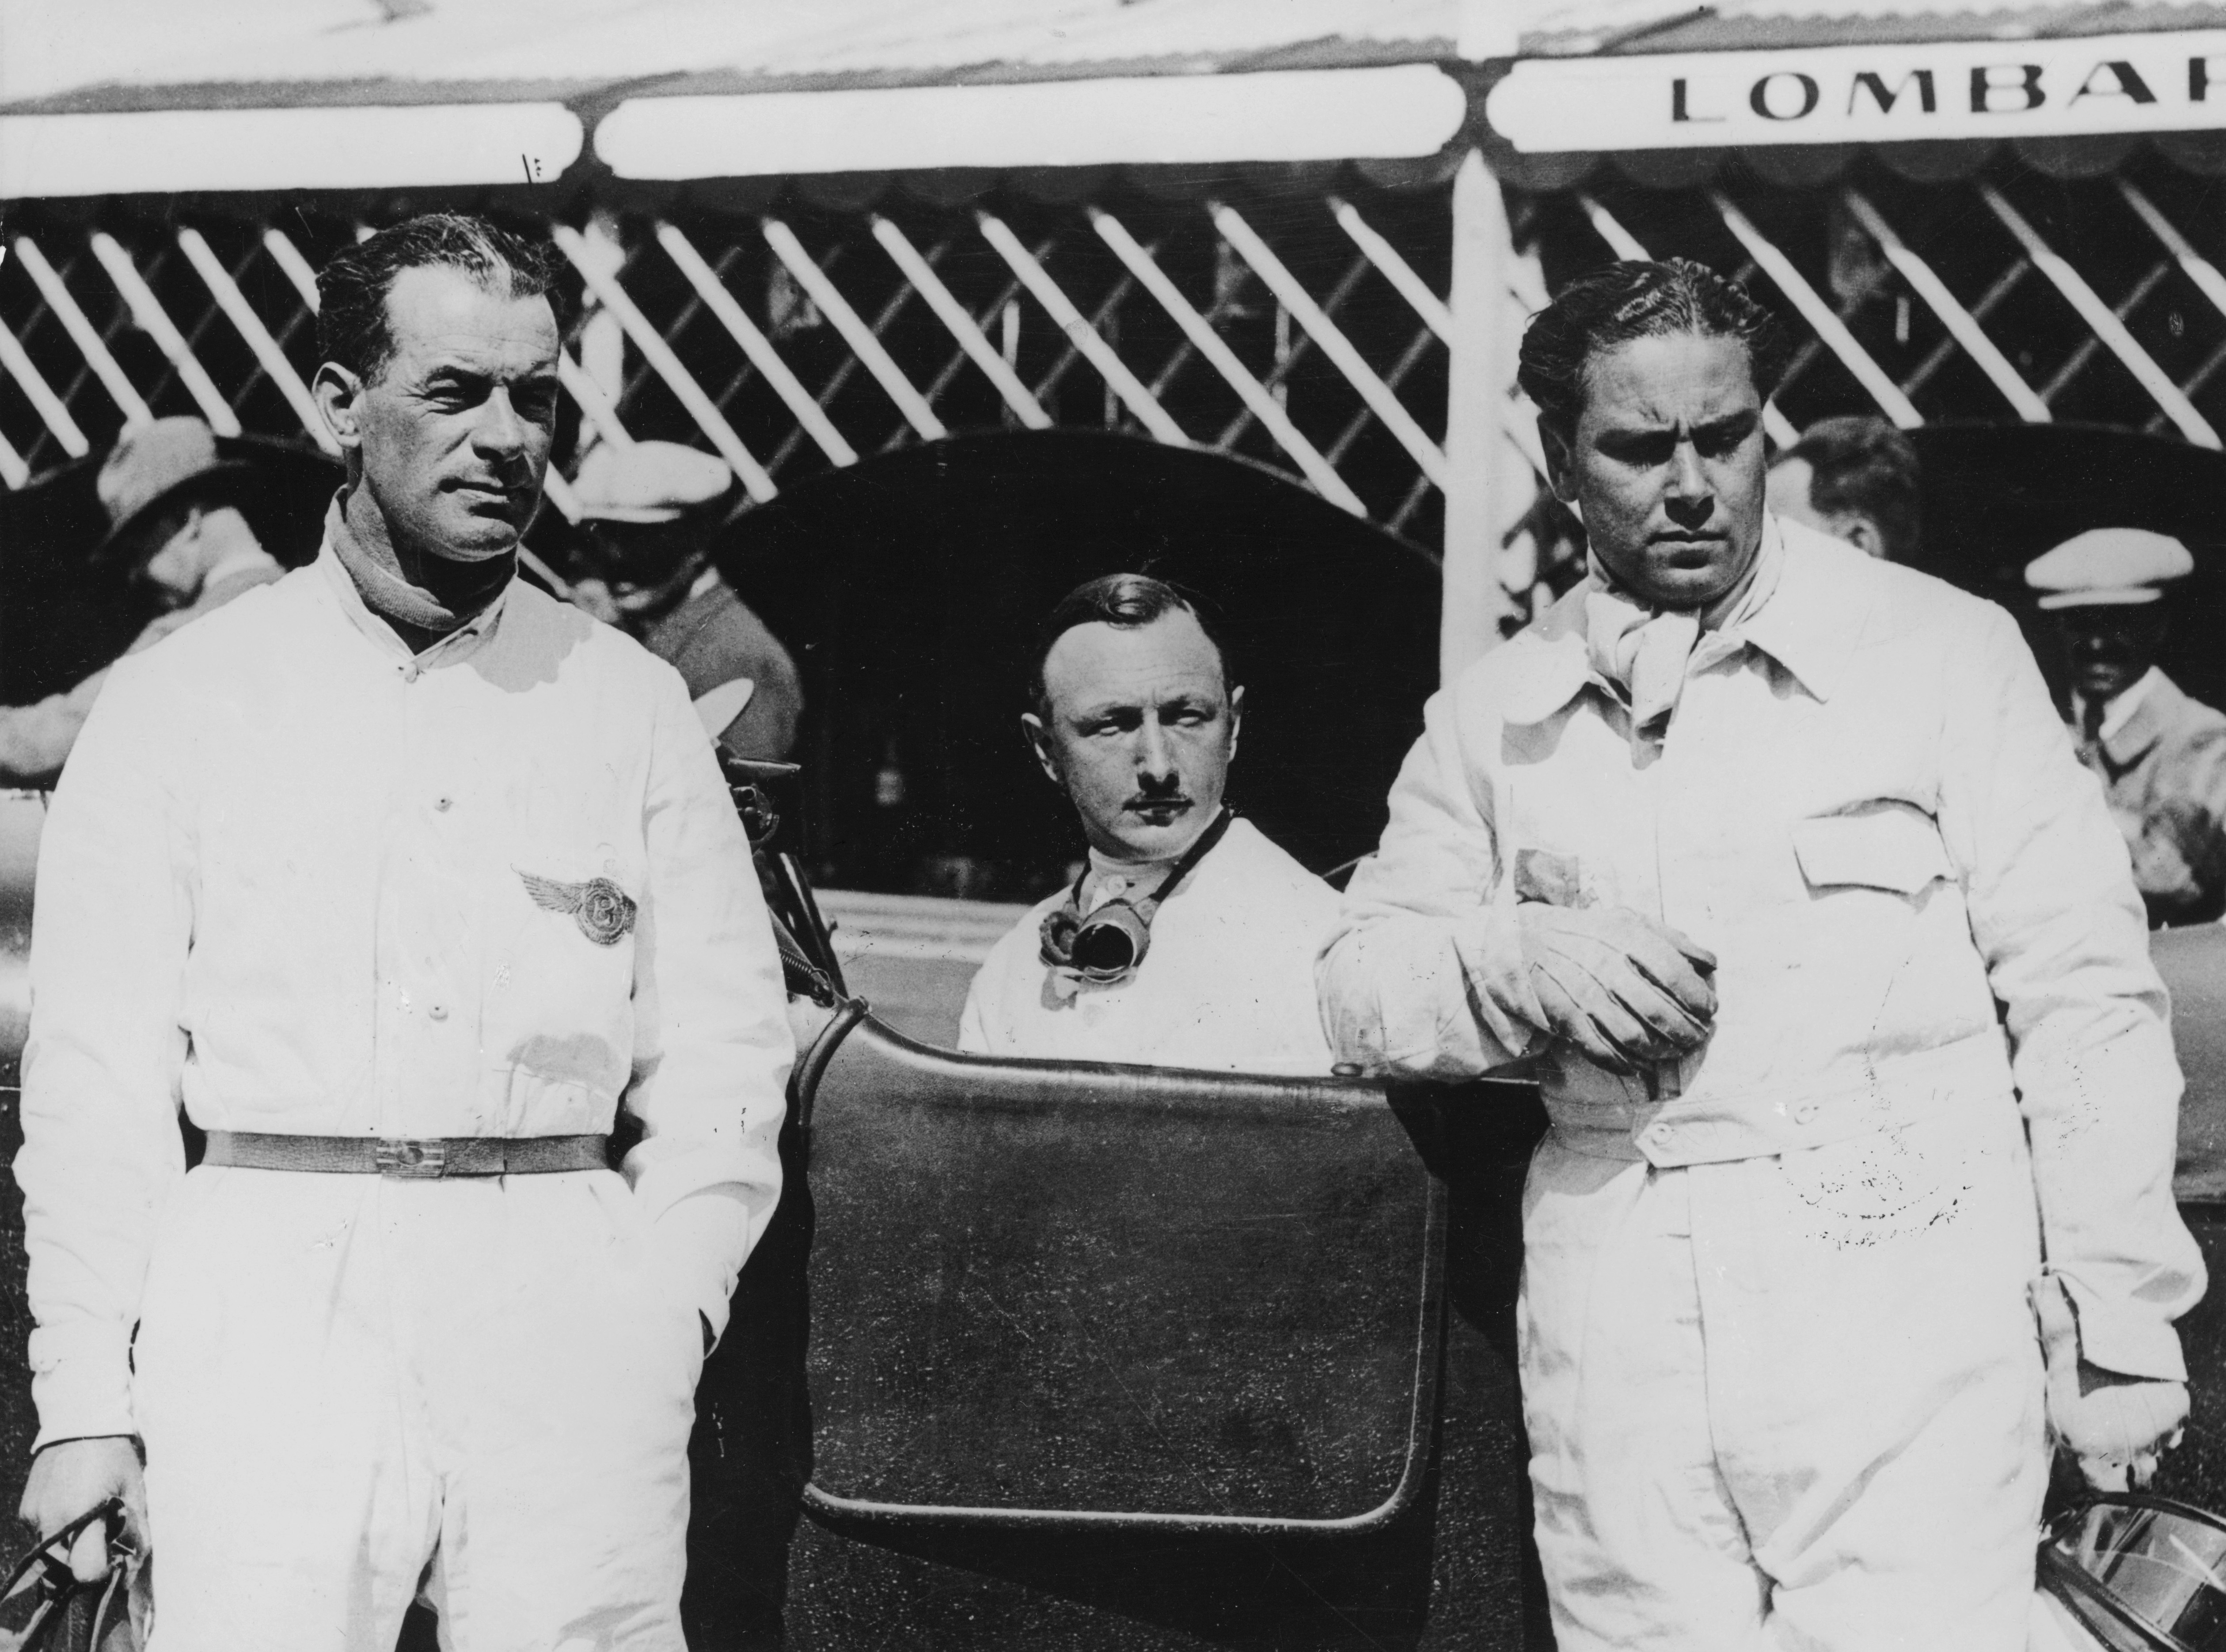    From left to right: Frank Clement, Sir Henry Birkin and Woolf Barnato, three of the so-called Bentley Boys, in the 1930s.